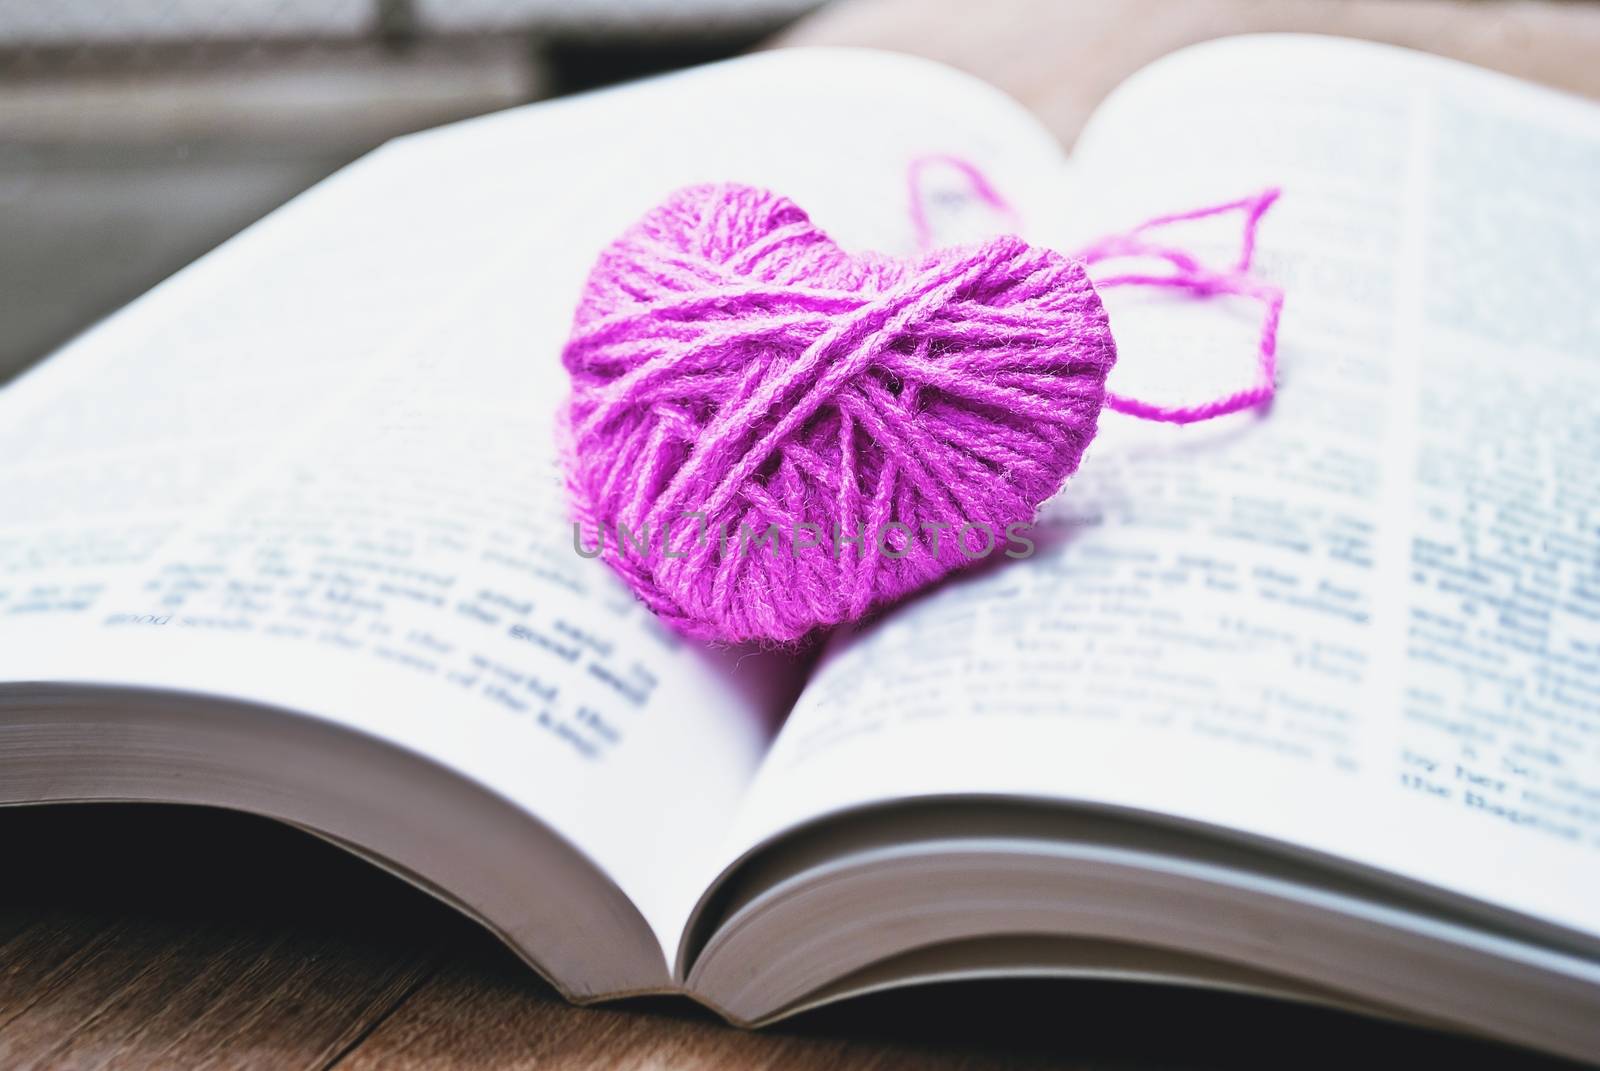 pink heart knitting wool put on the book, for valentine's day